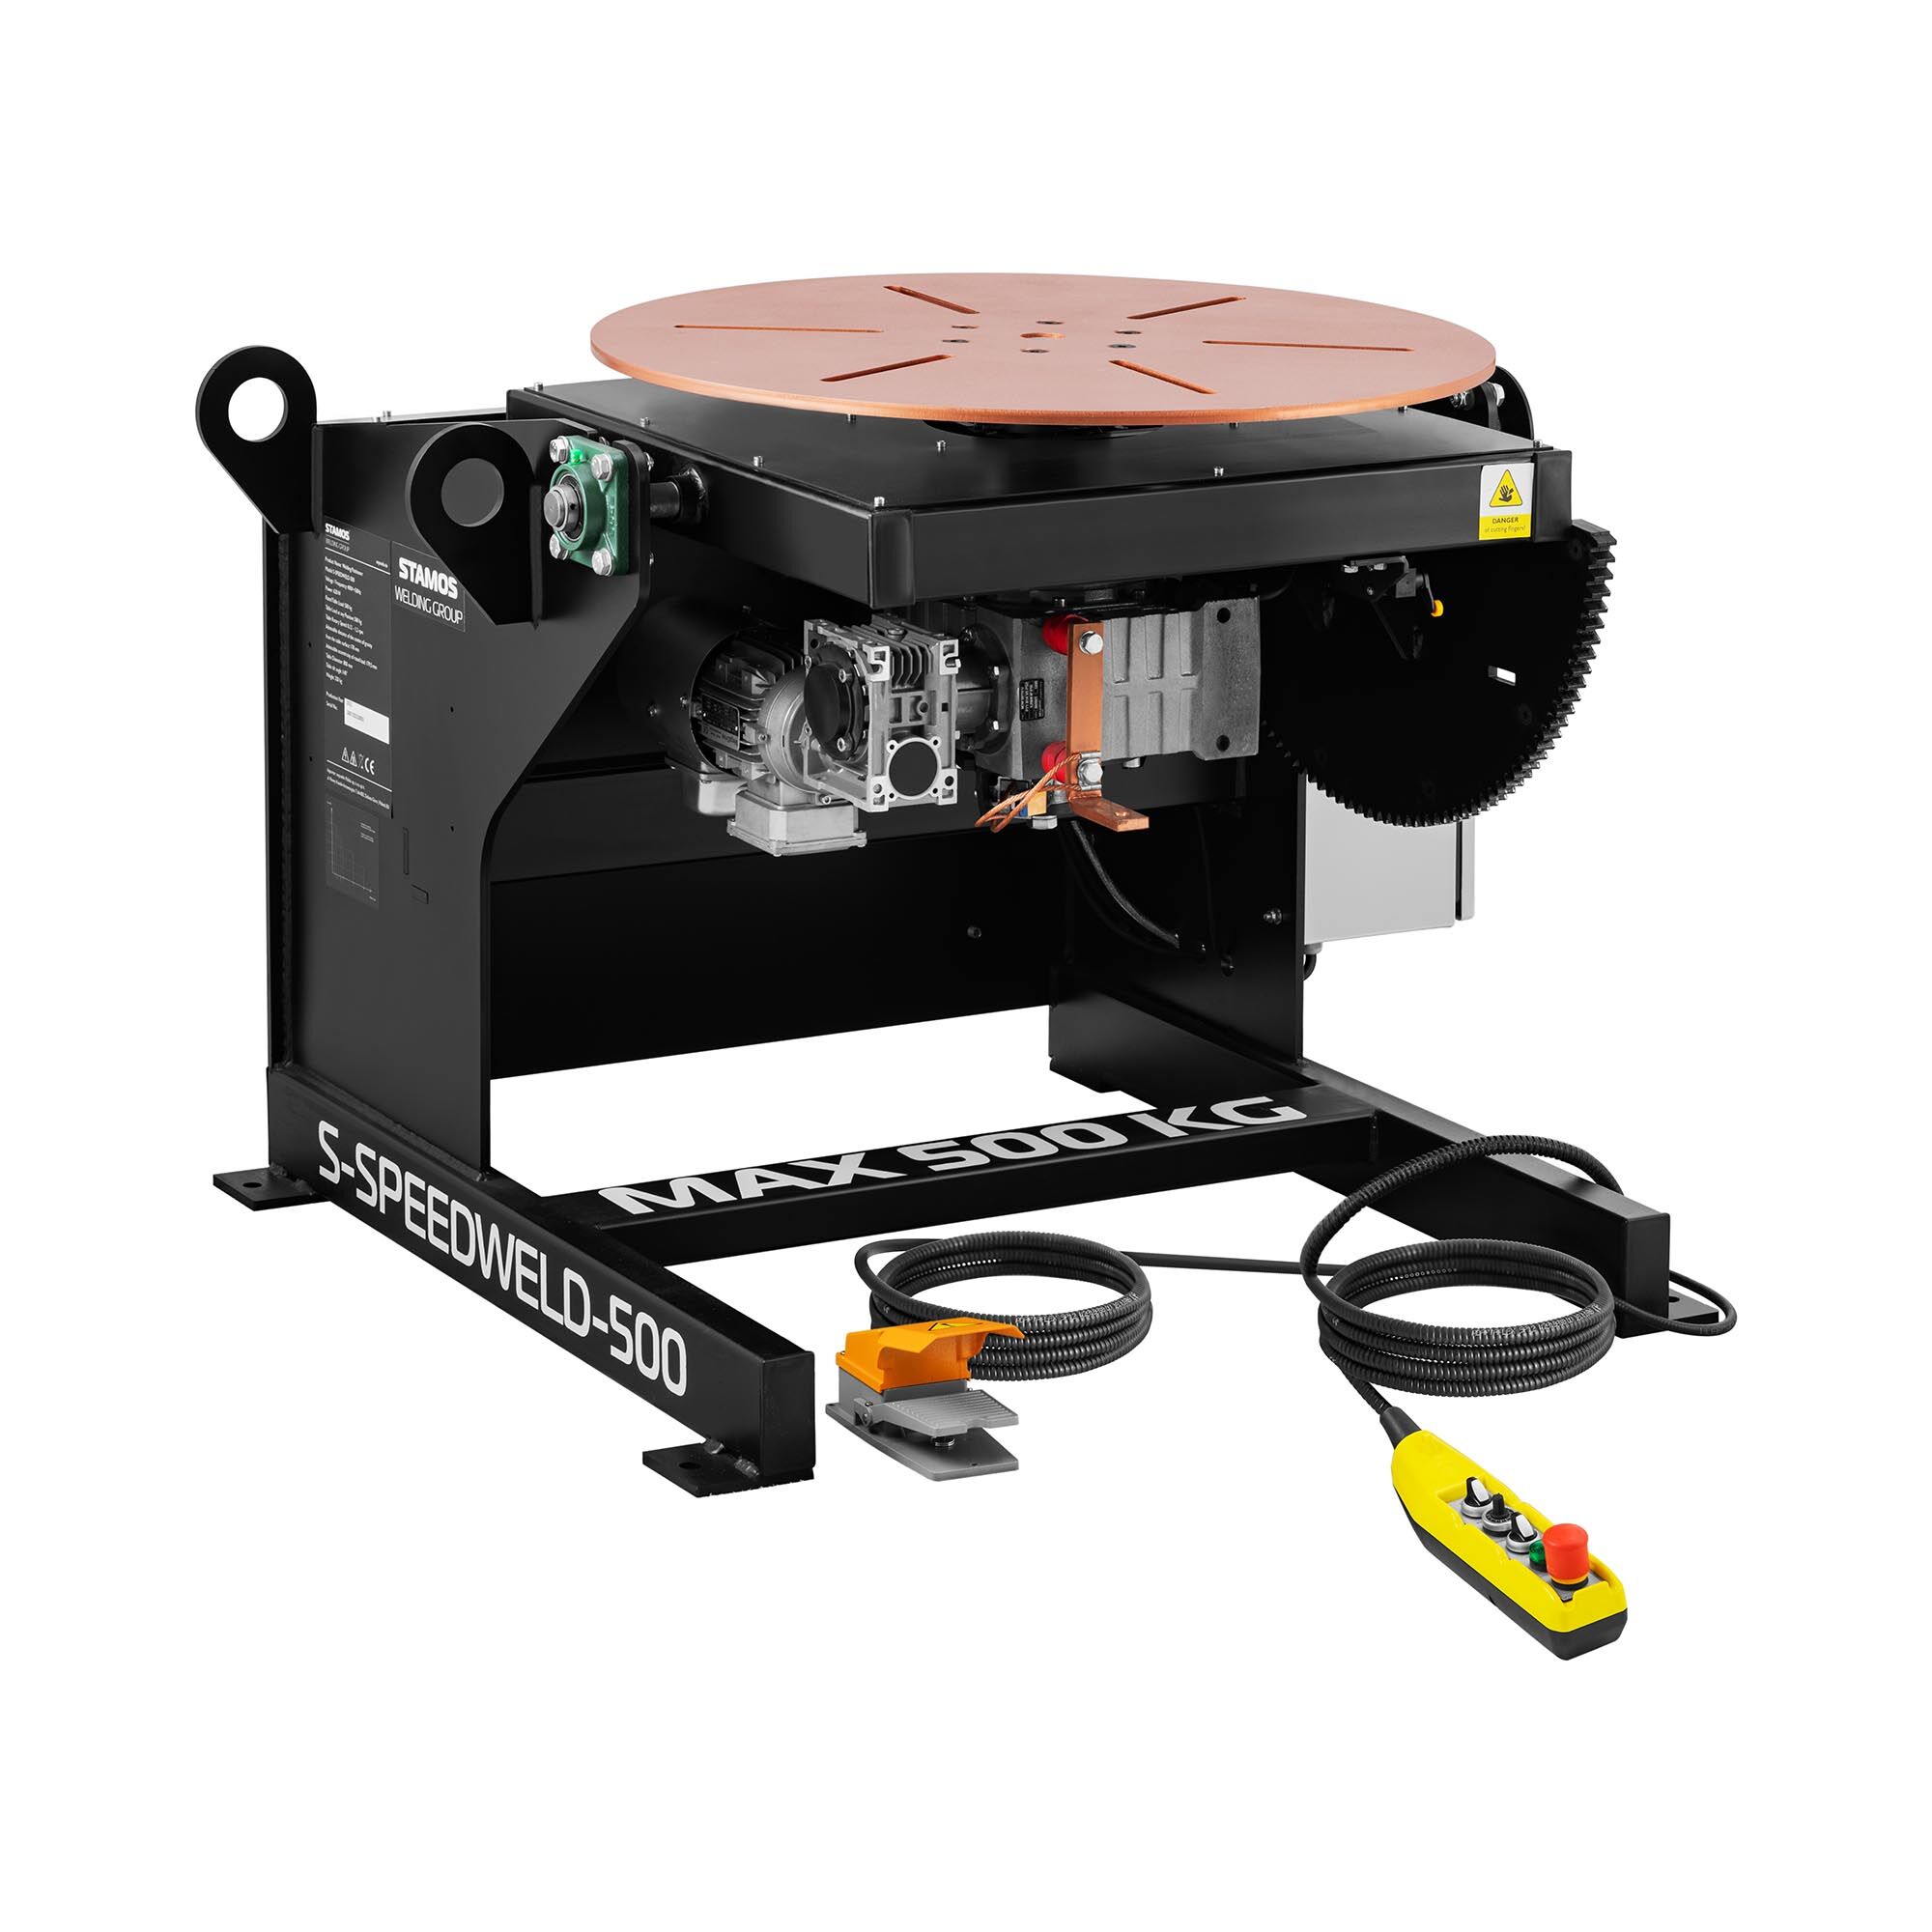 Stamos Welding Group Welding Turntable - 500 kg - table inclination 0 - 140° - foot pedal